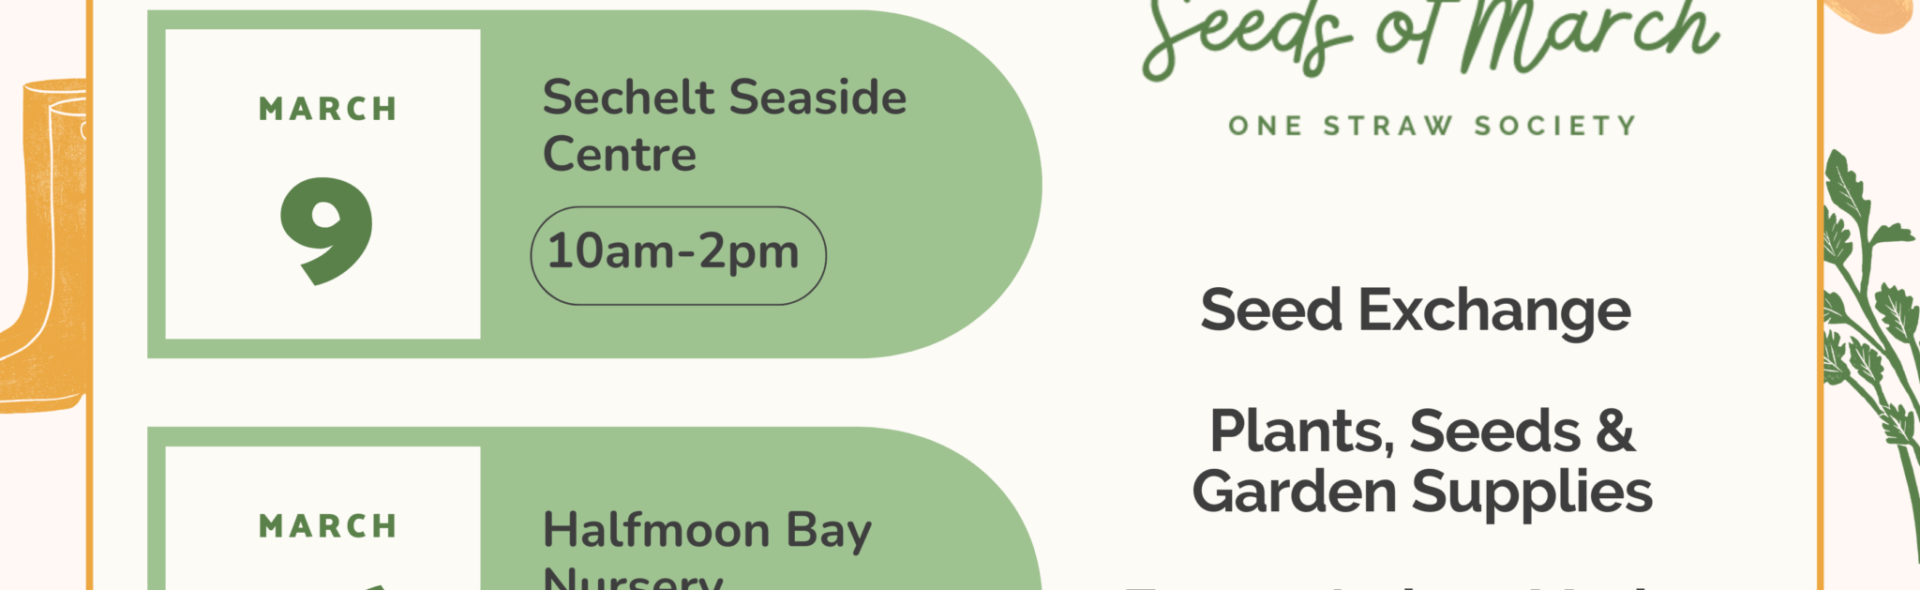 Seaside Centre: Seeds of March